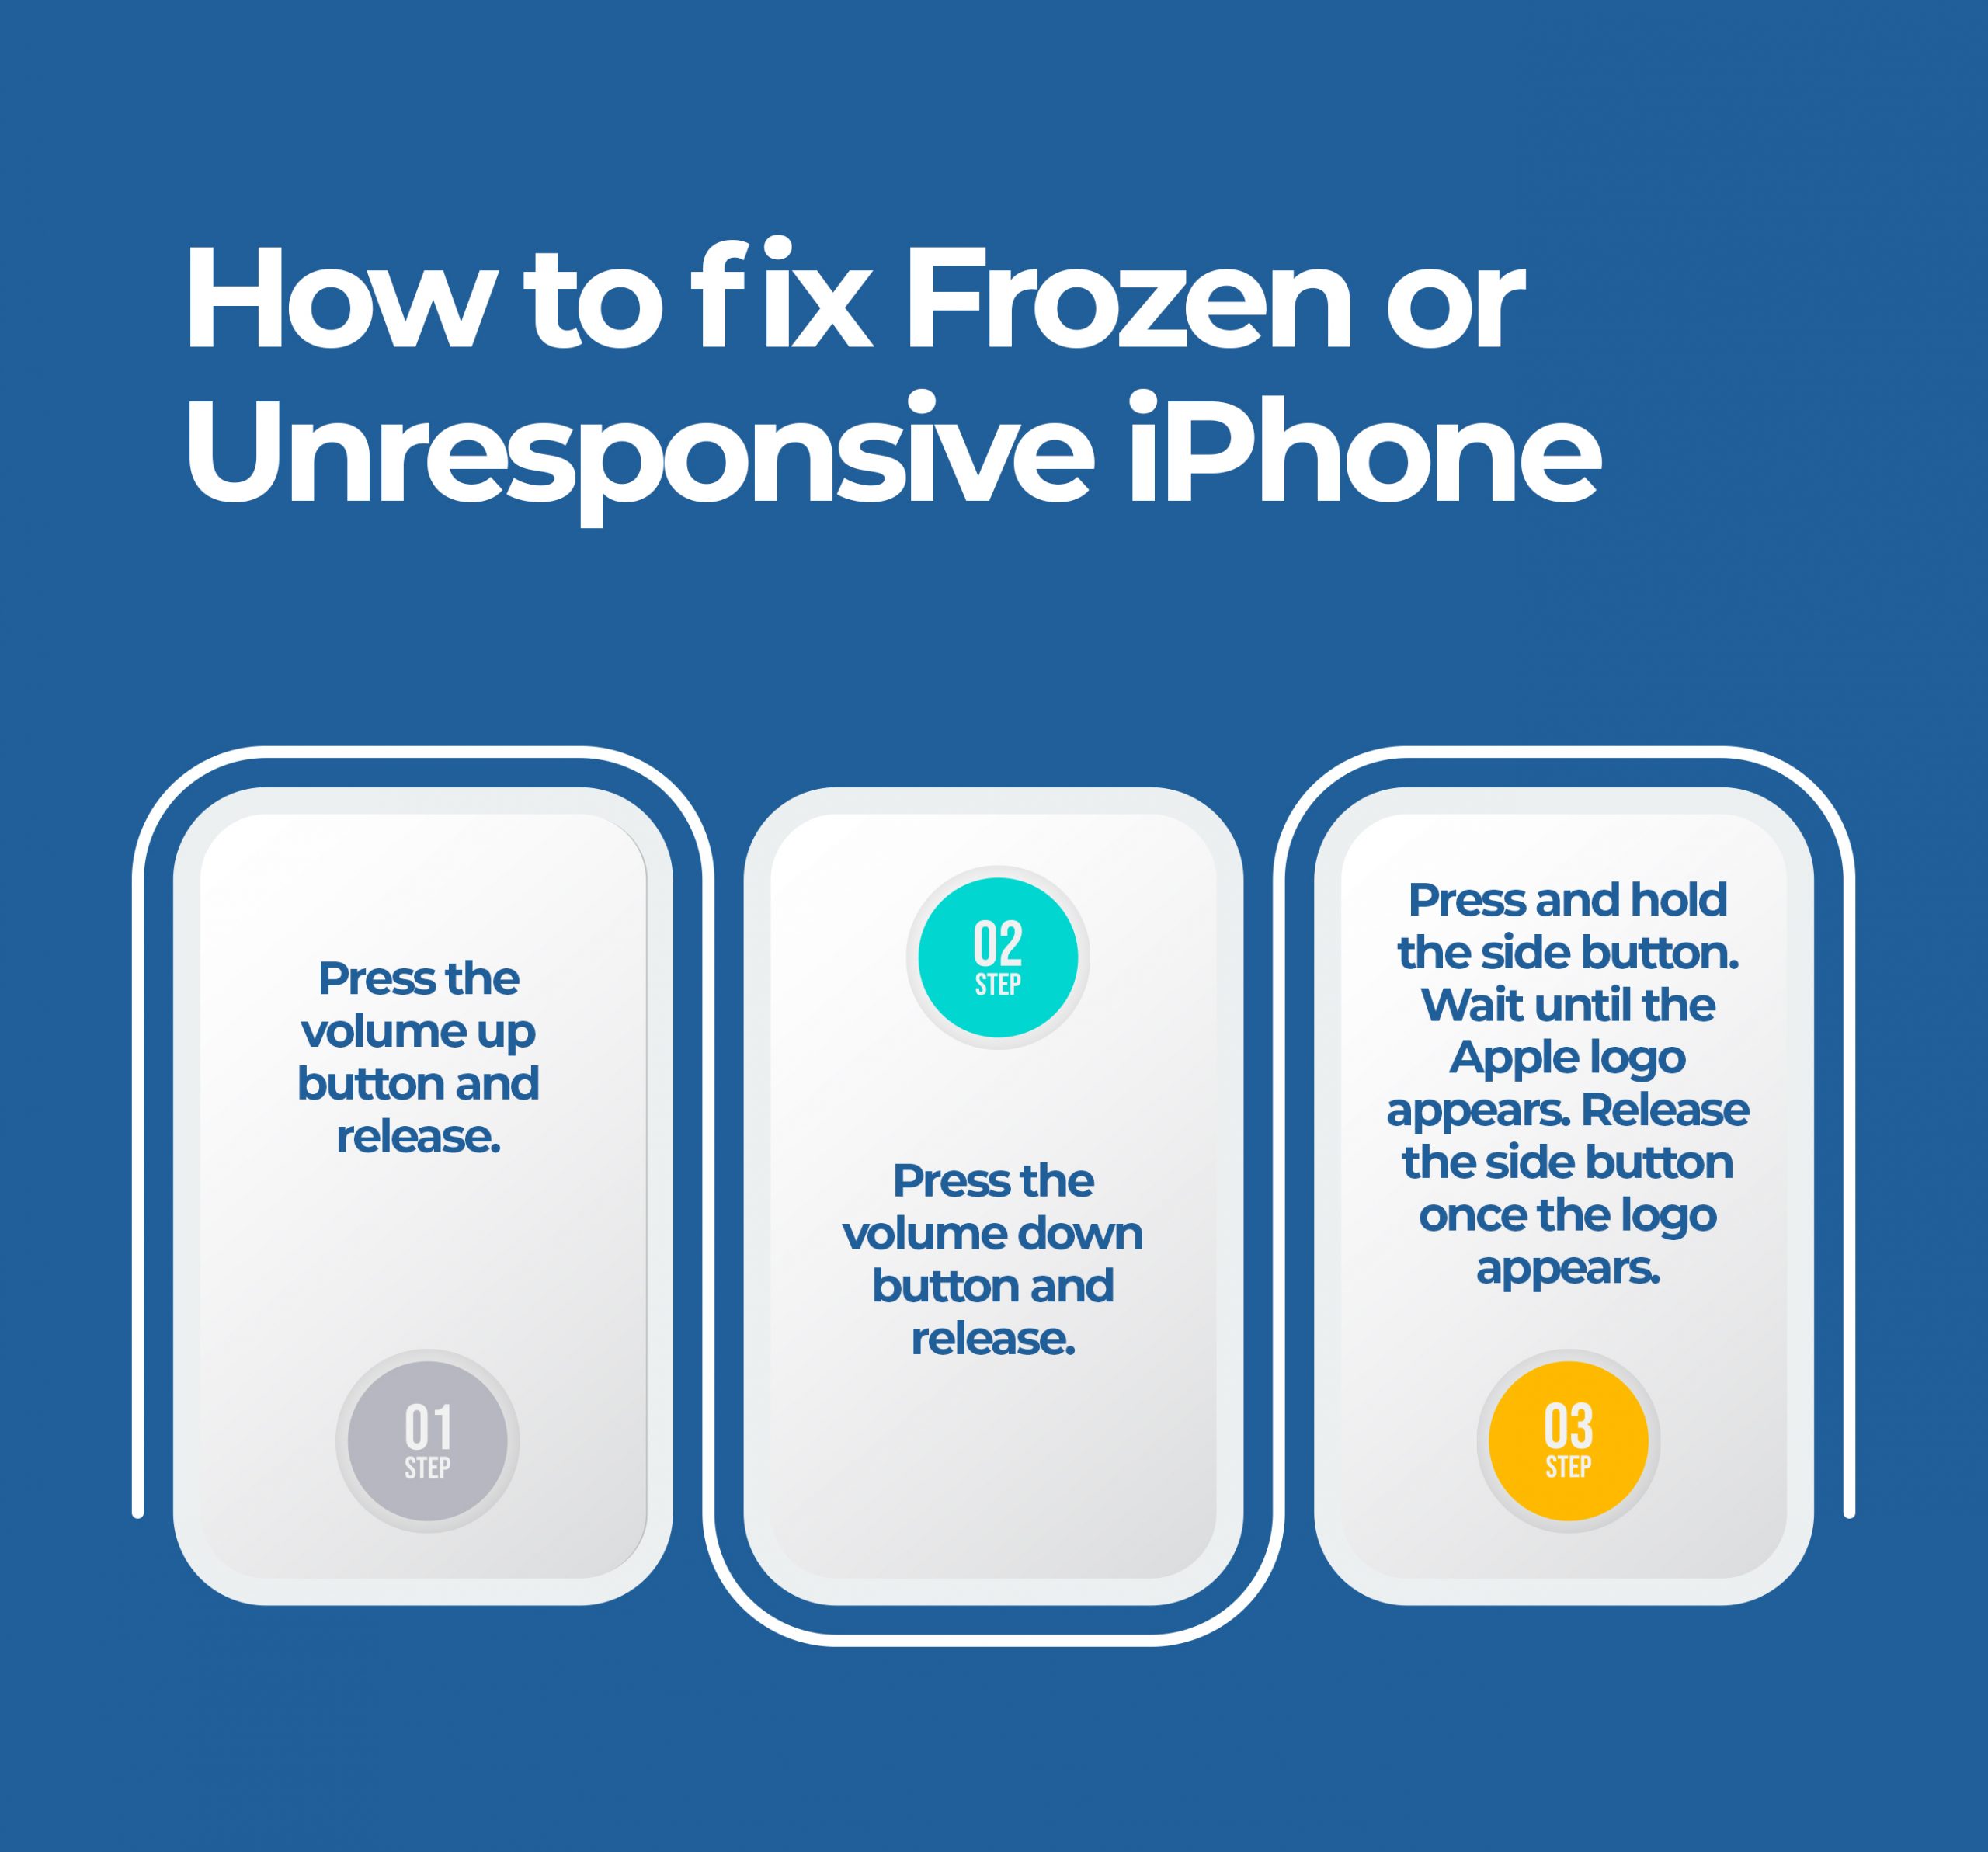 How To Fix a Frozen or Unresponsive iPhone